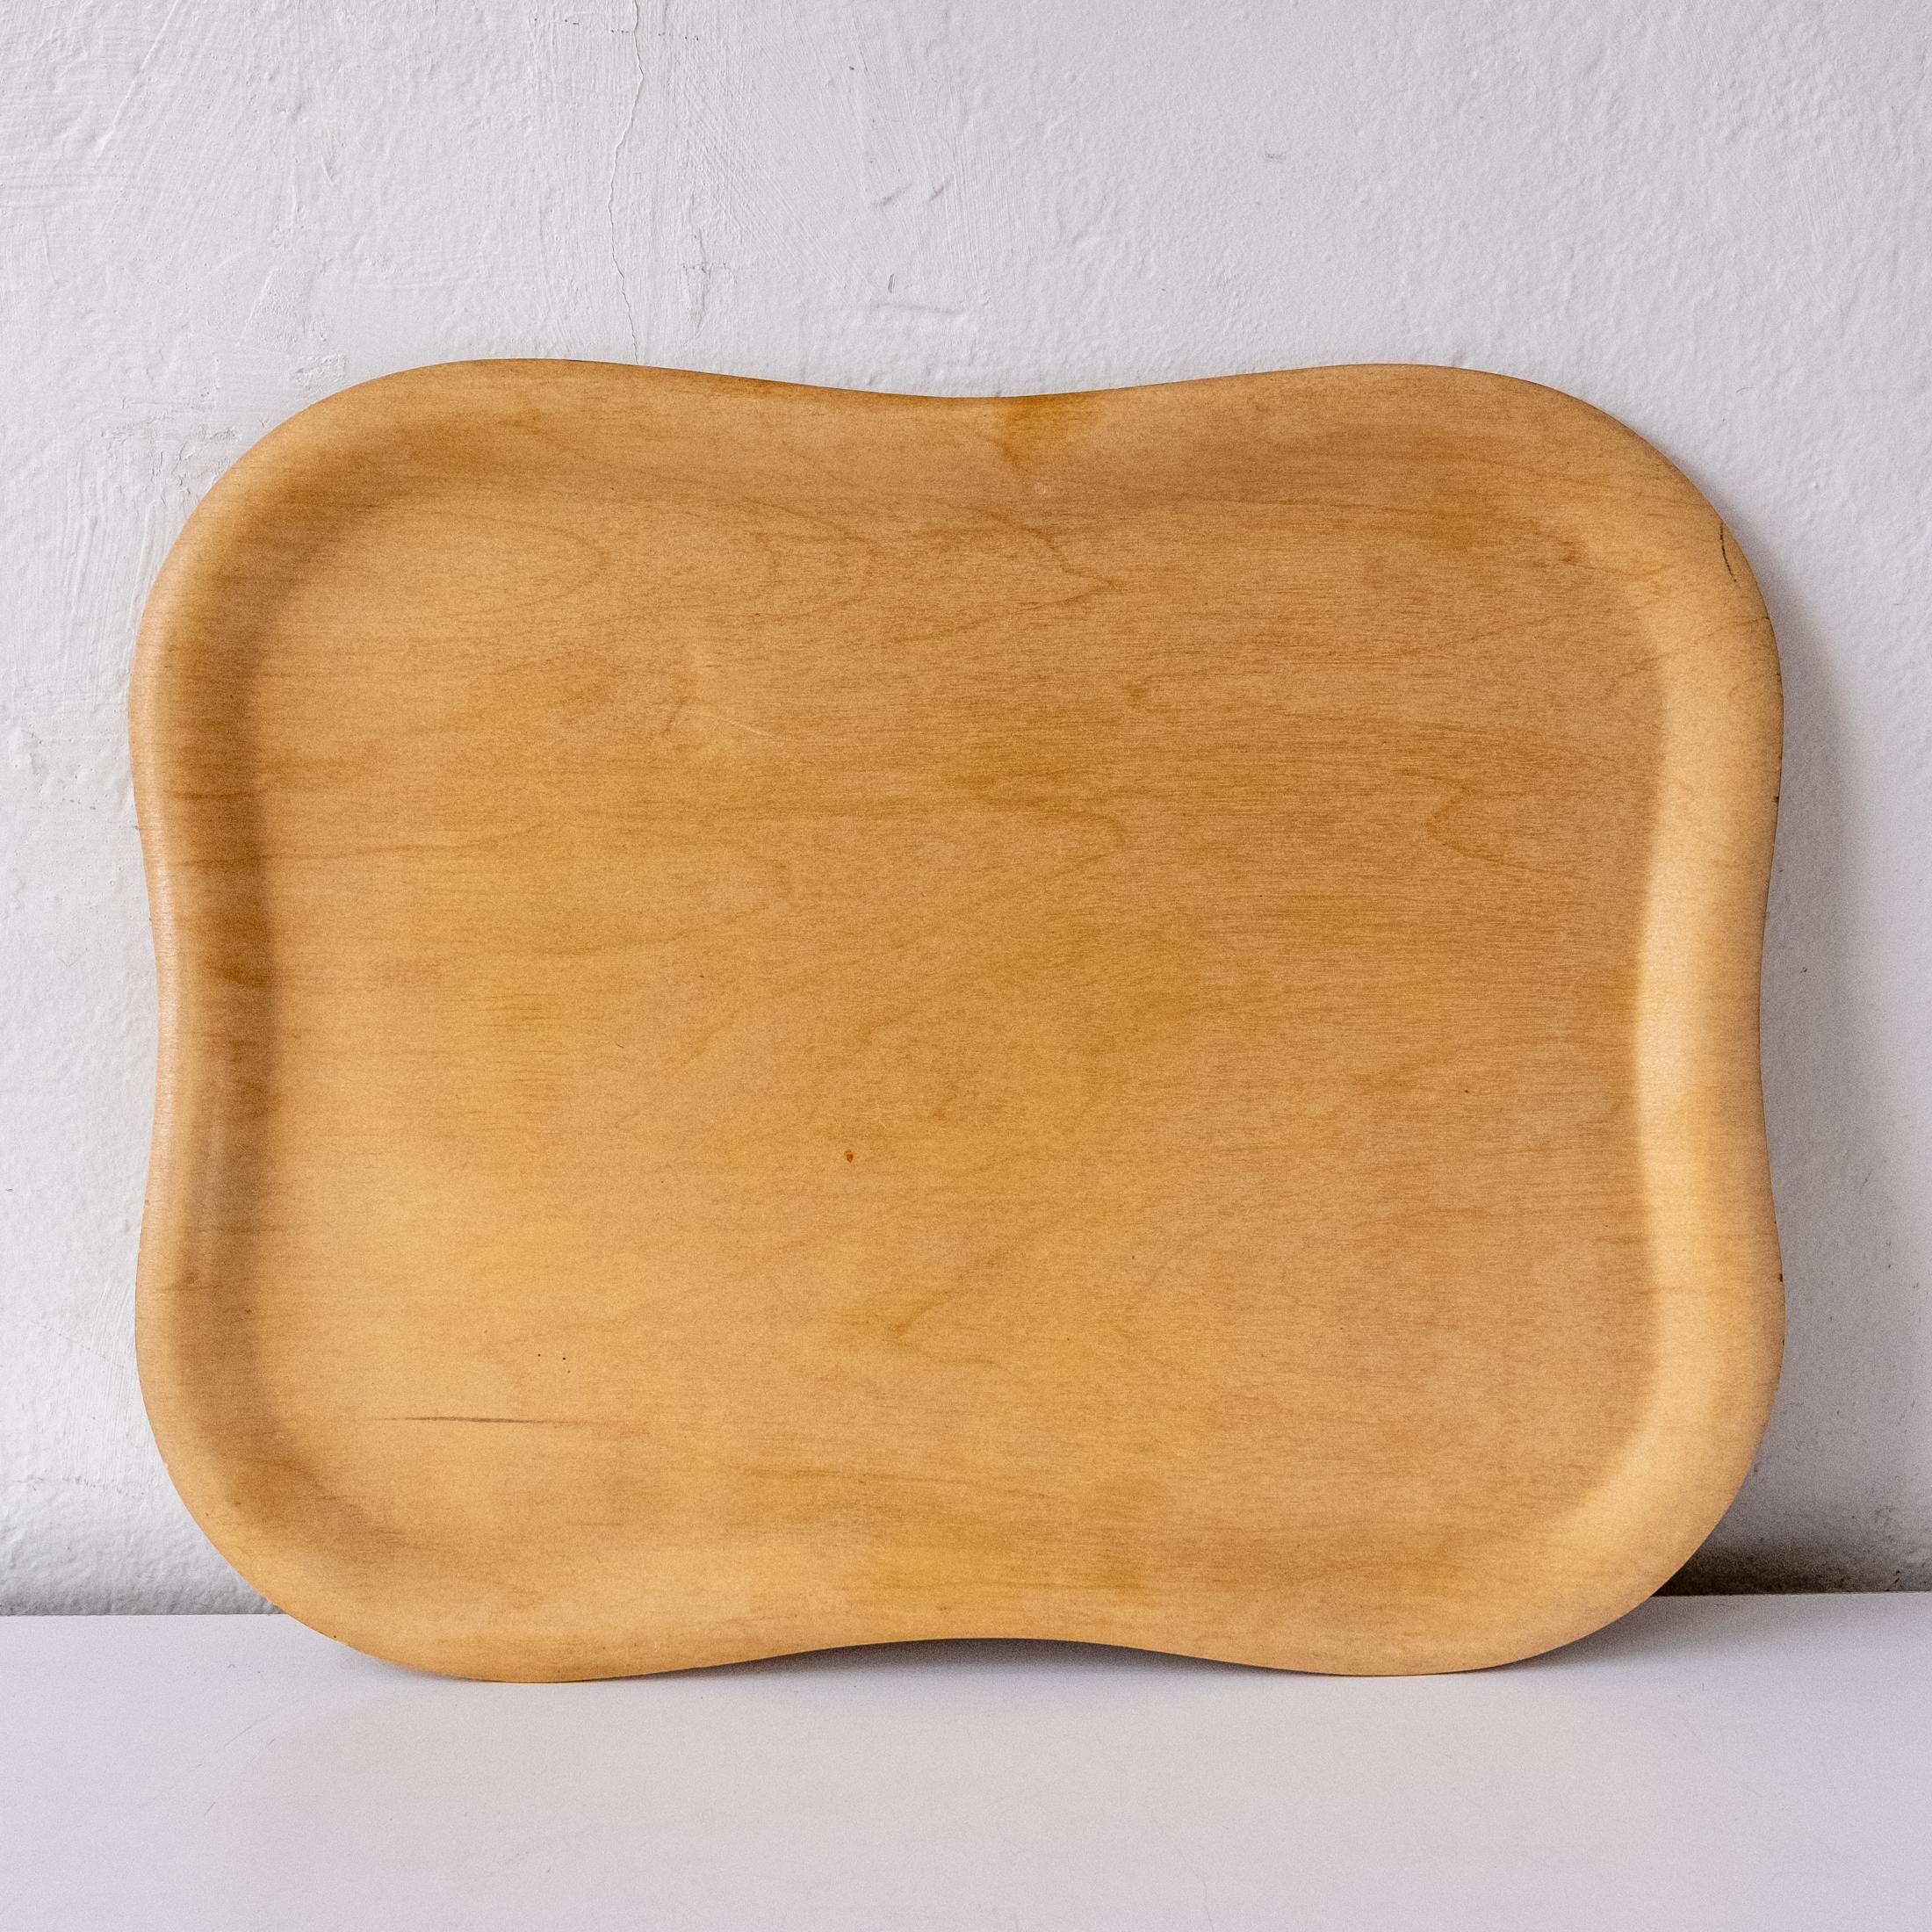 Fincraft molded plywood tray designed in the 1950s by Tapio Wirkkala for Soinne et Kni, Helsinki. Embossed stamp on the bottom. Finland